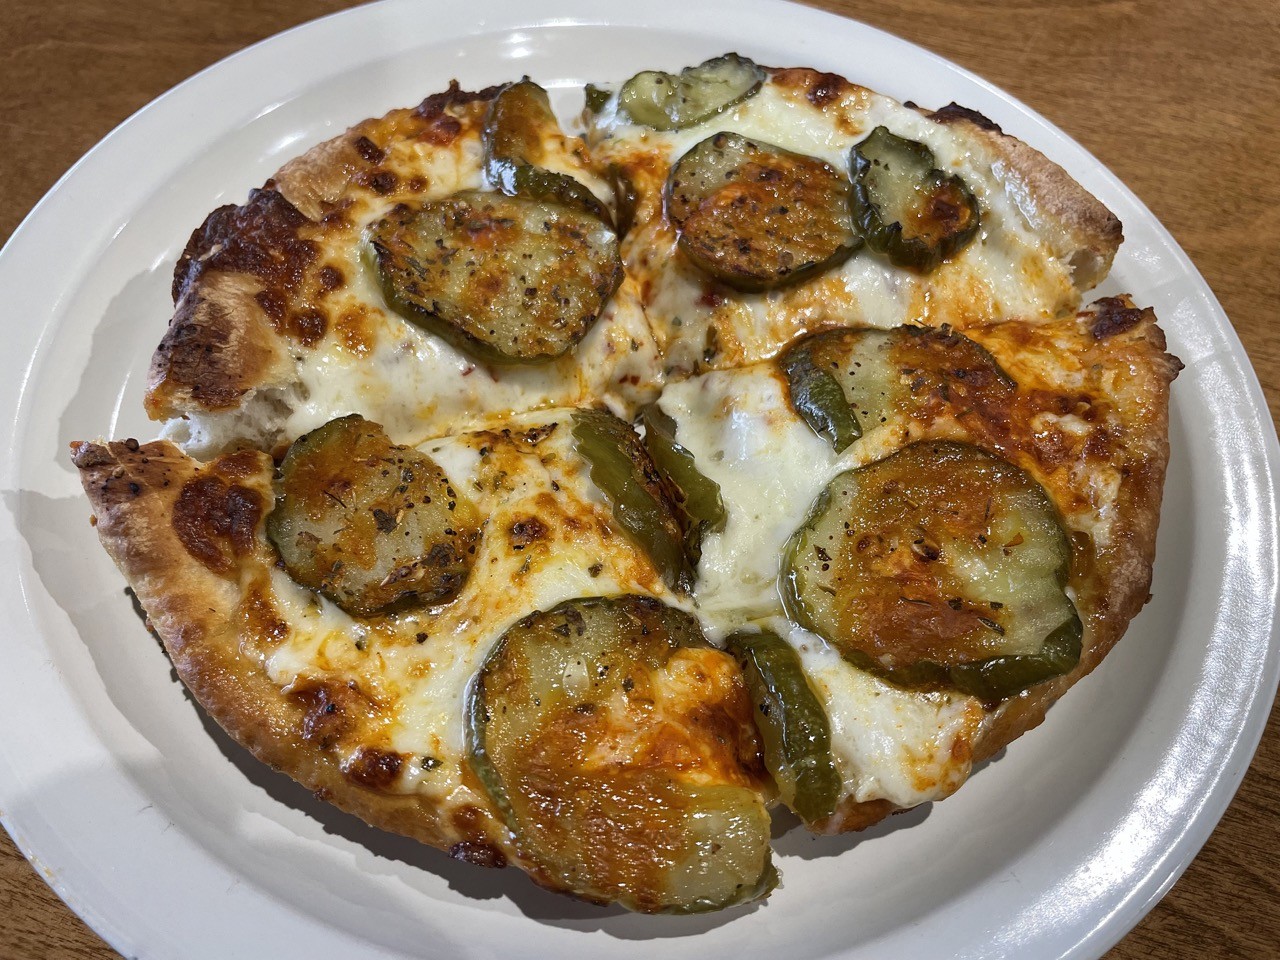 Craft House Pizza
4041 Preston Highway, 12607 Taylorsville Rd., 9601 Newbridge Rd., 2813 N. Hurstbourne Parkway 
Review: We Pick A Plate Of Pickle Pizza At Craft House
Recommended: "Let&#146;s talk about that pickle pie. They had me at Habagardil: I&#146;ve been a fan of the local Pop&#146;s Pepper Patch product for years, and the spicy level is just right for me. Not too mild, yet not fiery enough to hurt. An individual pizza ($7) with the traditional thick crust, not deep-dish thick but not foldably thin either, was crisp and crackery with good toasty flavor. It was spread with a dollop of creamy, tangy ranch dressing, topped with eight or ten spicy Habagardil slices, drizzled with fiery Buffalo sauce and sprinkled with hot red pepper flakes. Authentic Italian it&#146;s certainly not, but I loved the flavor and texture combination. I would do it again, without shame.&#148;